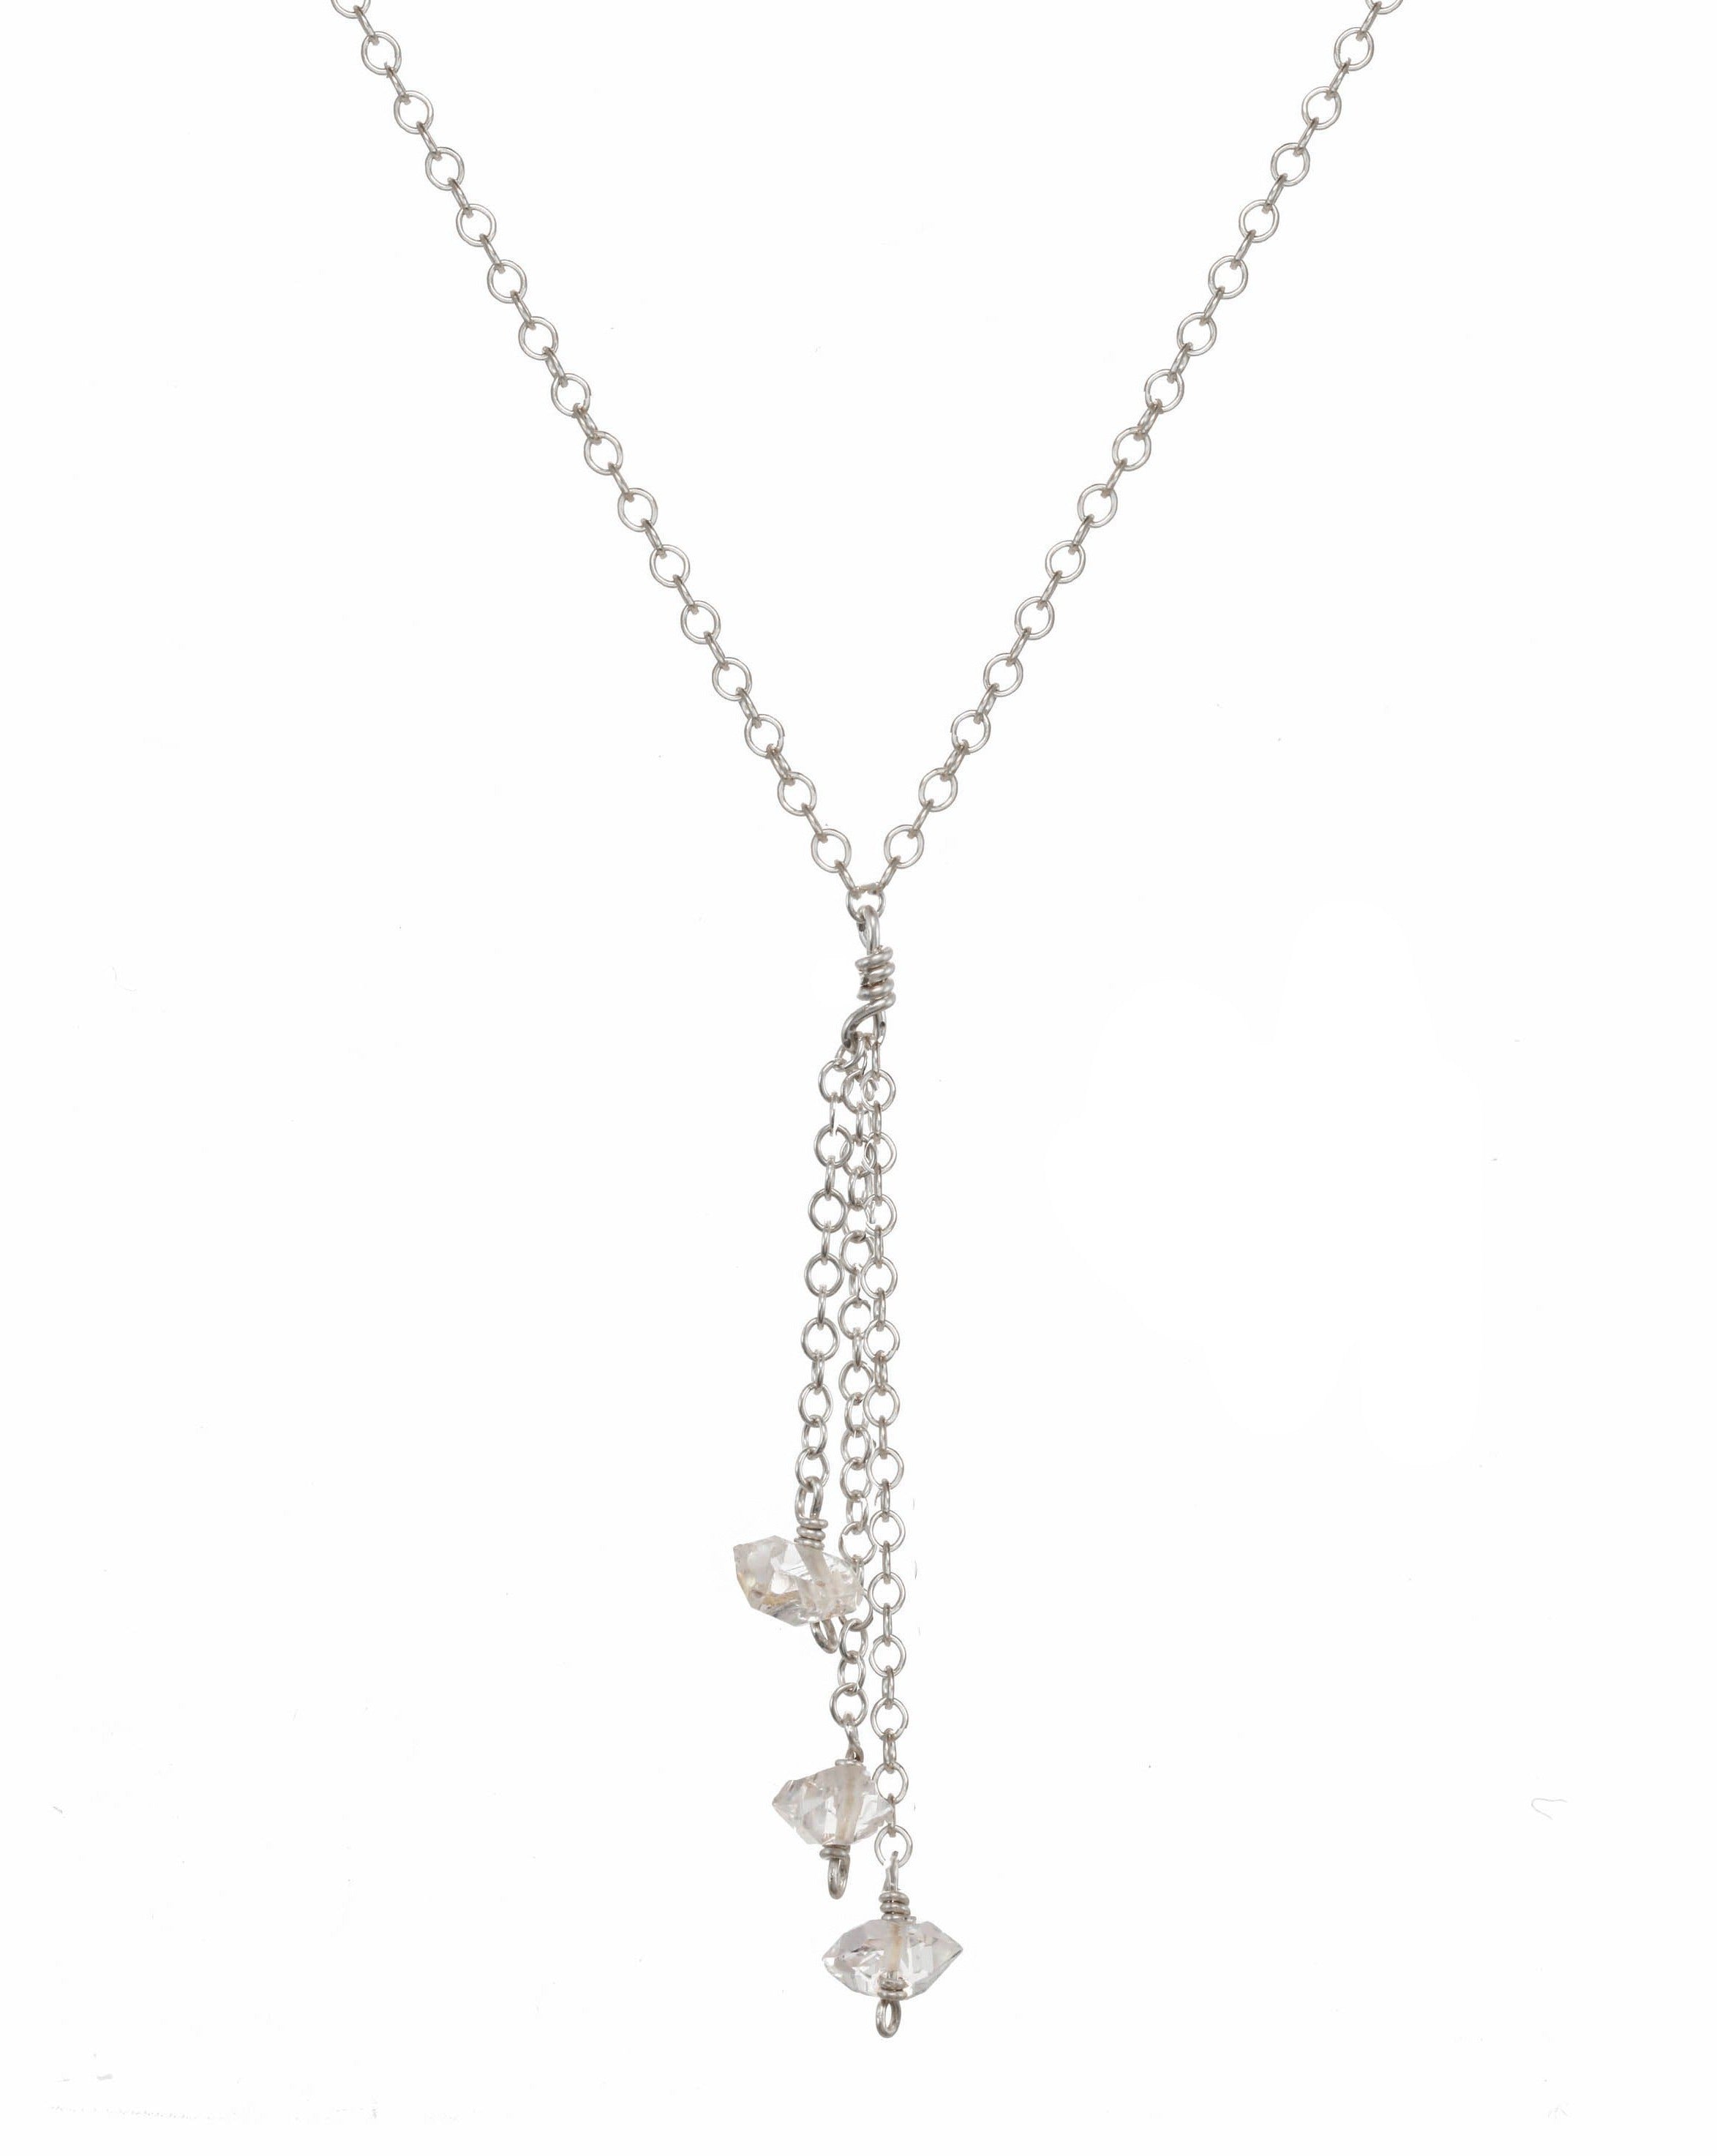 Miren Herkimer Necklace by KOZAKH. A 16 to 18 inch adjustable length, 2 inches drop lariat style necklace, crafted in Sterling Silver, featuring Herkimer Diamonds.